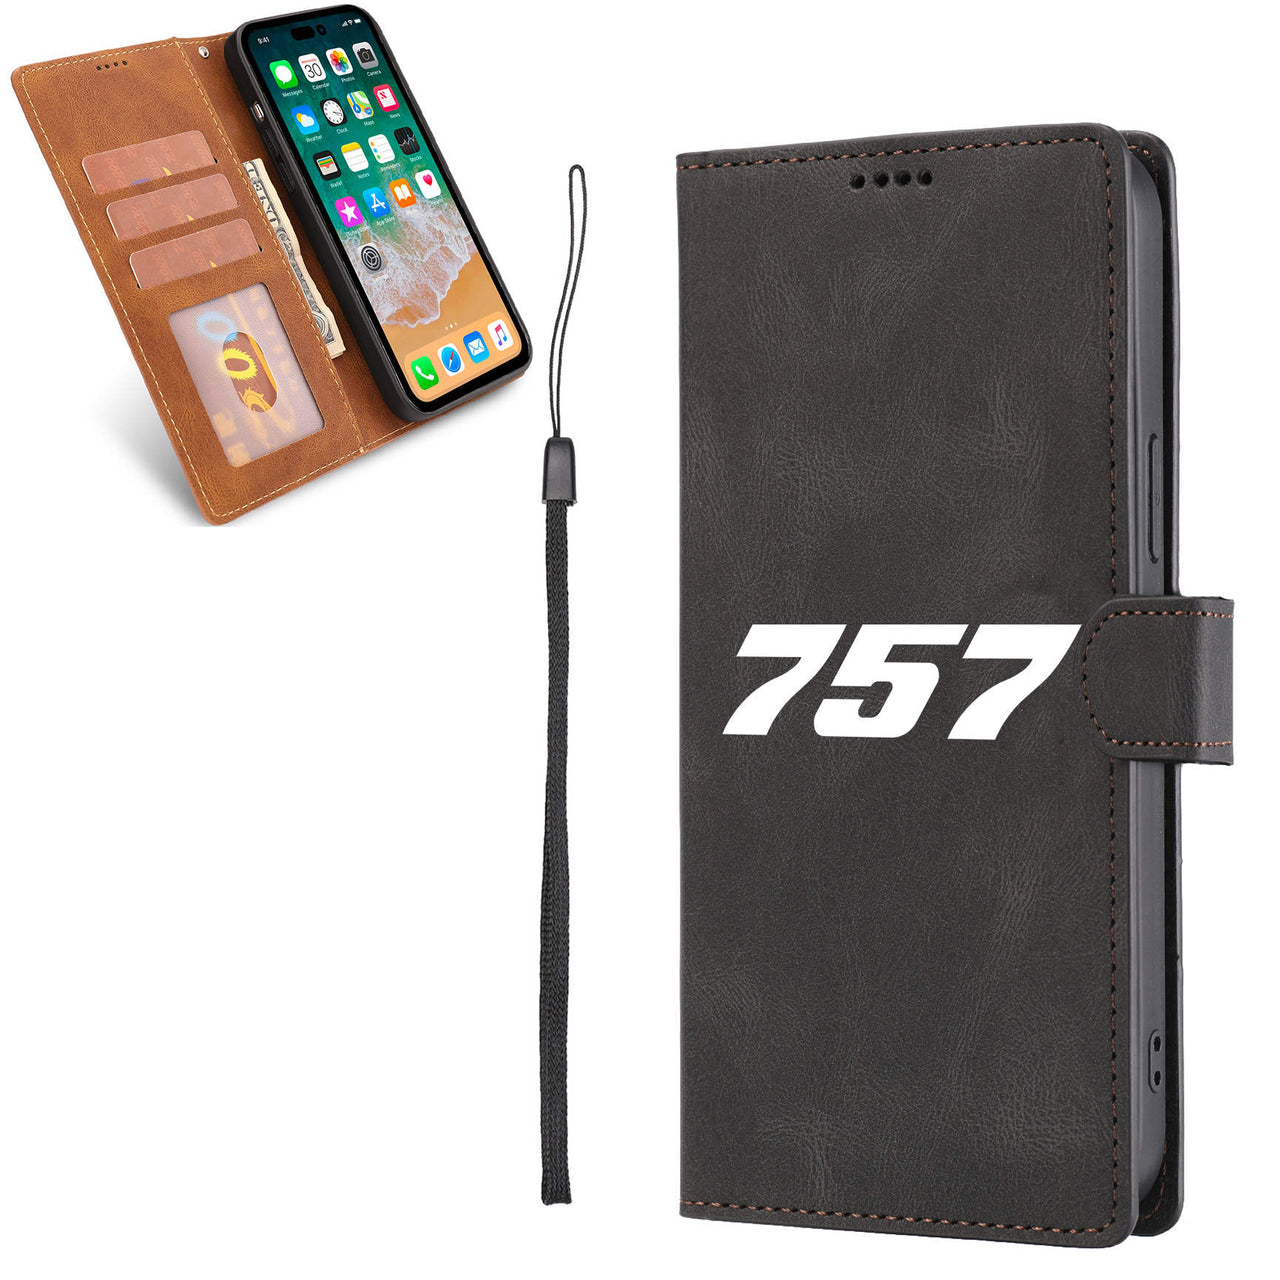 757 Flat Text Designed Leather iPhone Cases